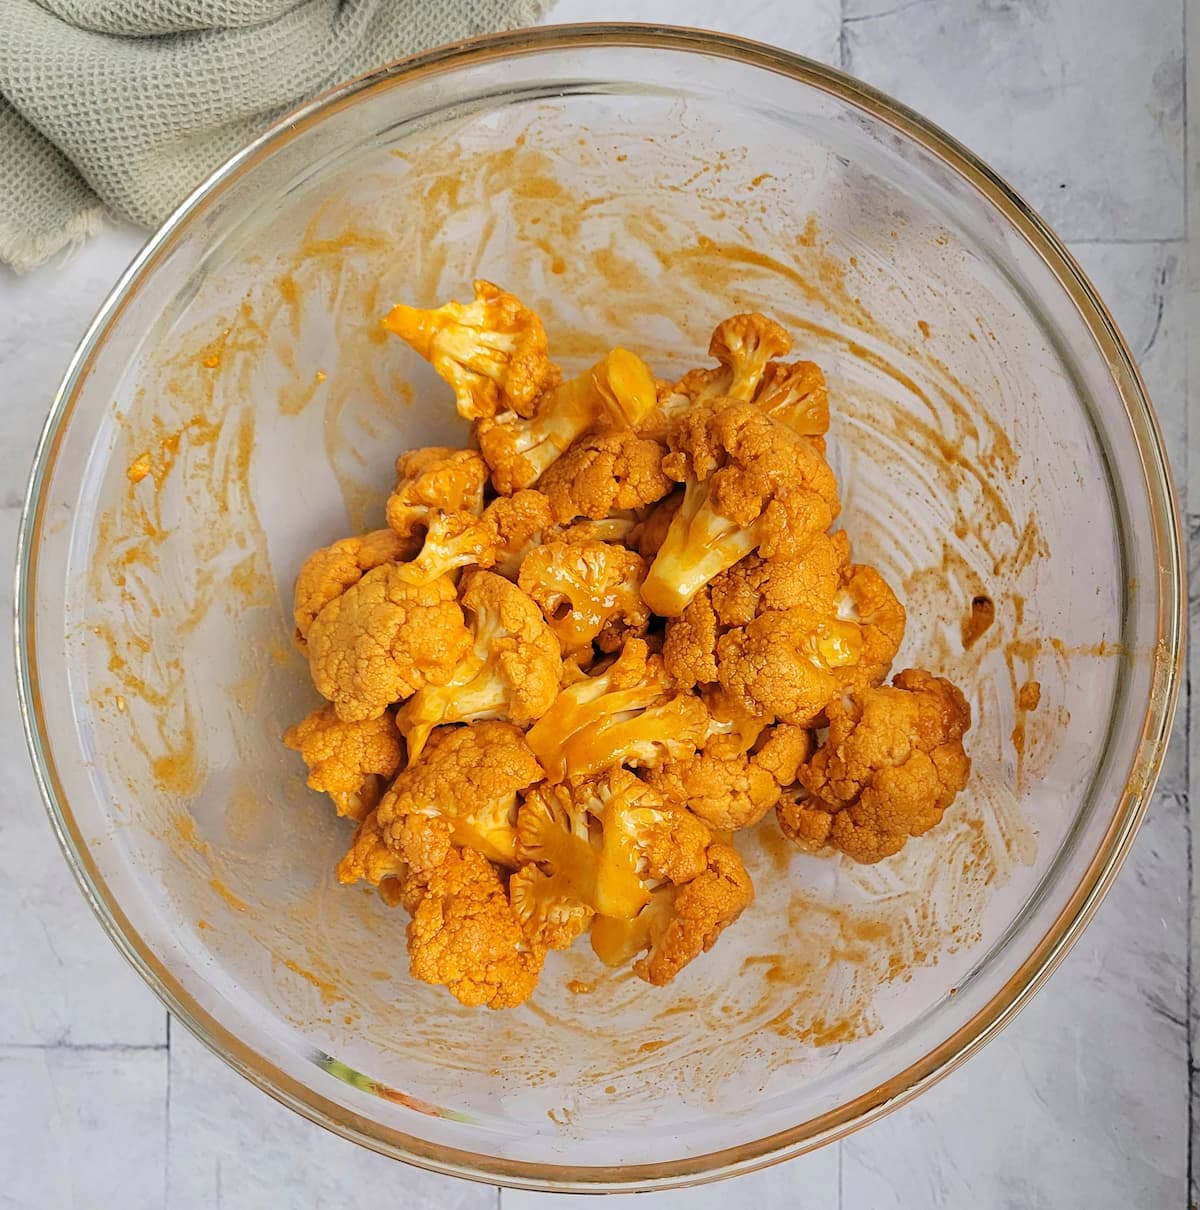 cauliflower florets with buffalo sauce in a bowl